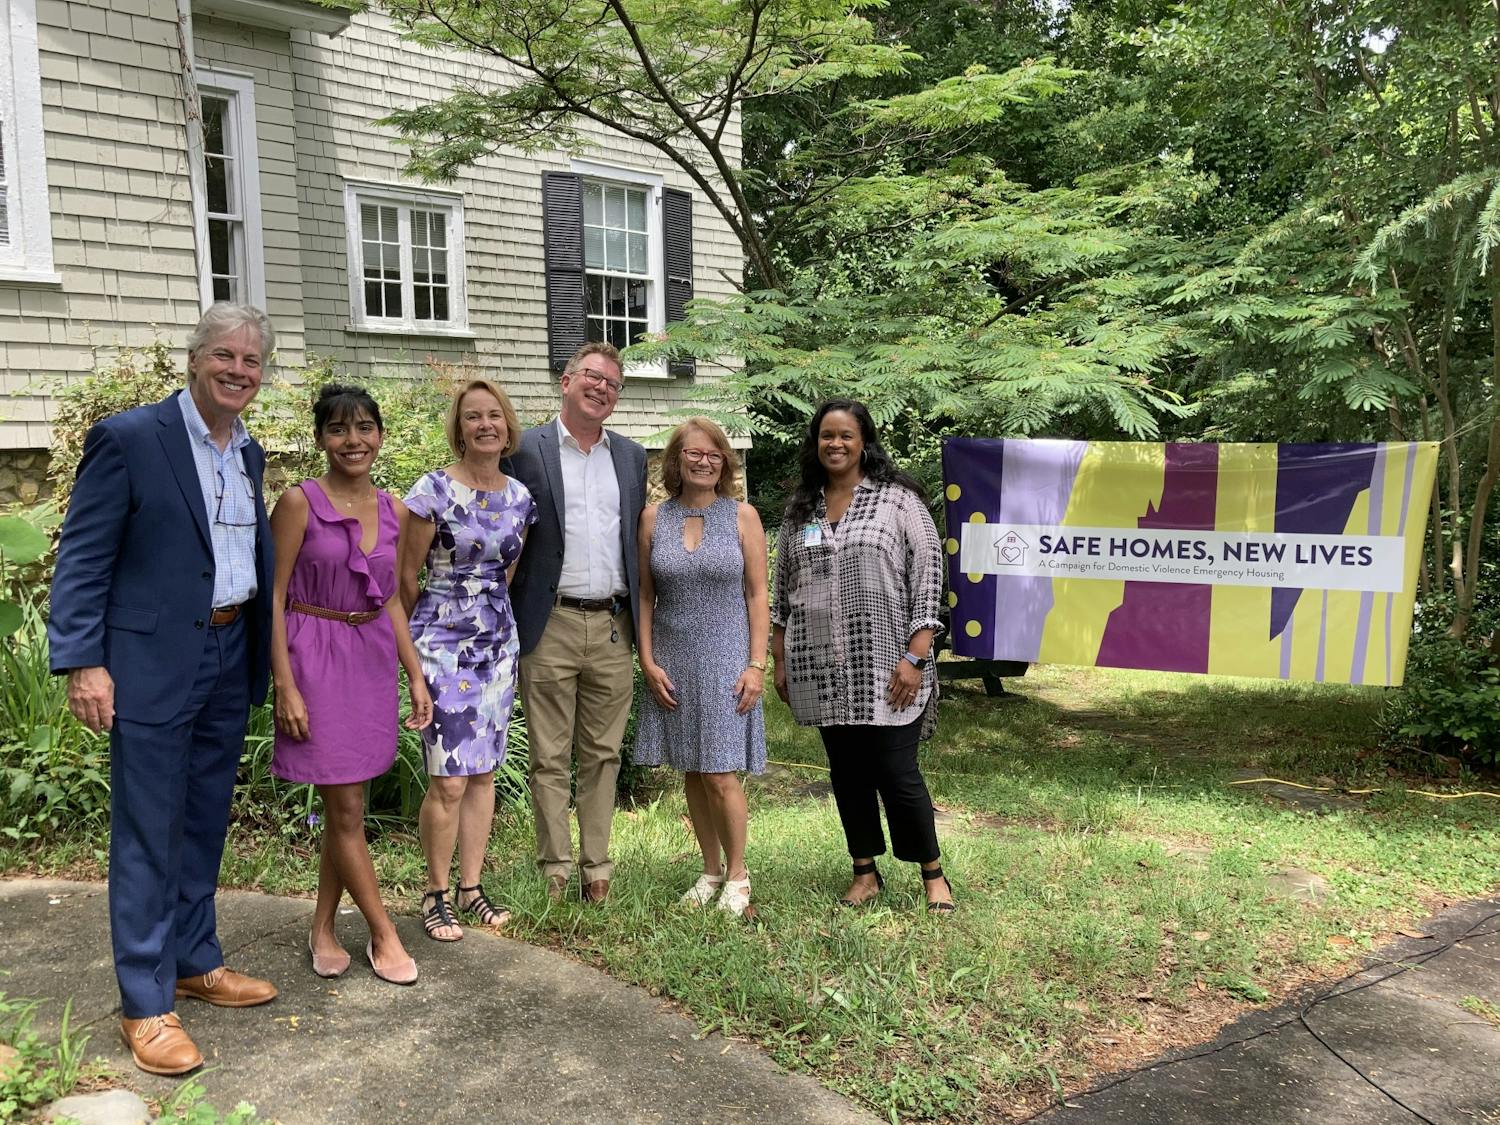 
The speakers at the Safe Homes Celebration on June 4, 2021 gather for a photo. From left to right: Gary Bowen, PhD, Dean of UNC School of Social Work; Natalia Rivadenerya, Emergency Housing Coordinator, Compass Center for Women and Families; Gillian Hare, Board Chair, Compass Center for Women and Families; Martin Baucom, Vice-President for Development, UNC Health Foundation; Jeannie Denuo, Safe Homes Campaign Co-Chair and Compass Center Board Member; Loryn Clark, Deputy Town Manager for the Town of Chapel Hill. Photo courtesy of Ann Simpson/Compass Center. 
